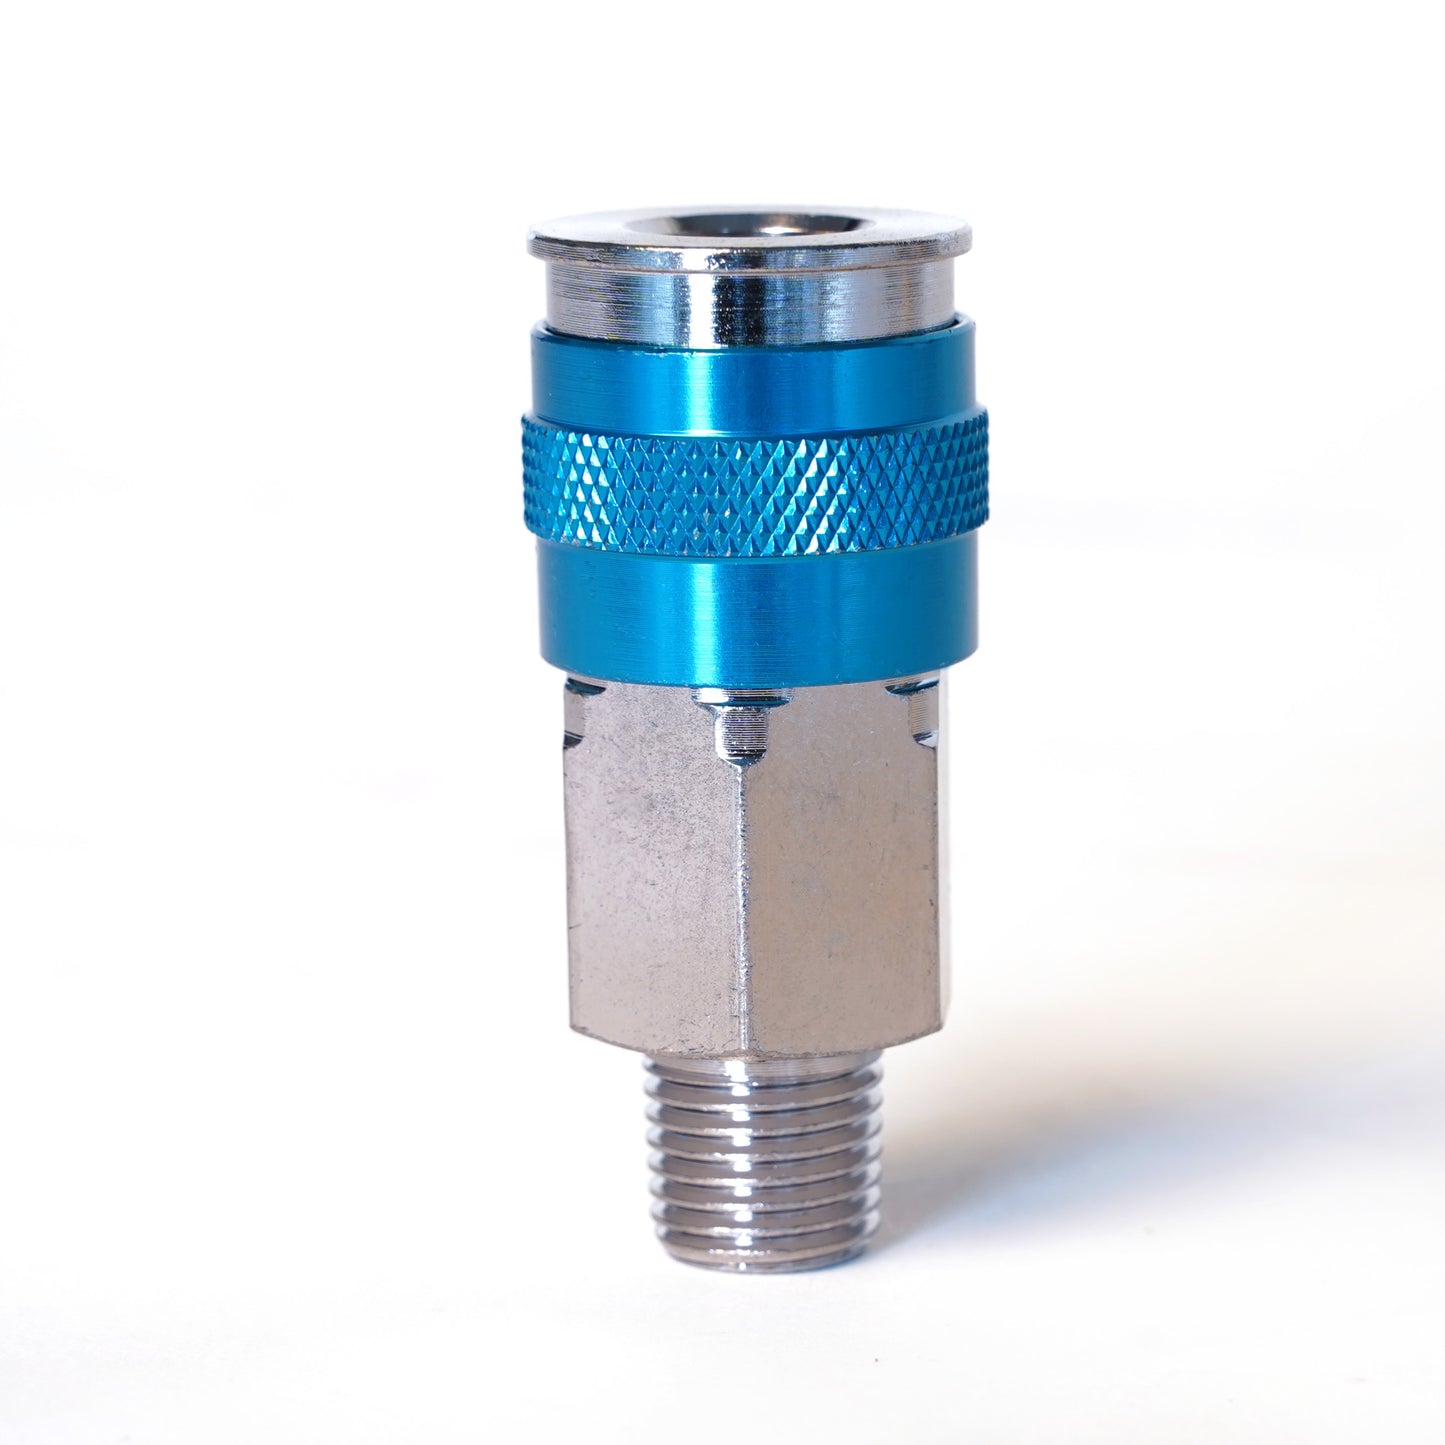 1/4-Inch Plated Brass 3-in-1 Universal Quick Disconnect Coupler with 1/4-Inch Male NPT Threads